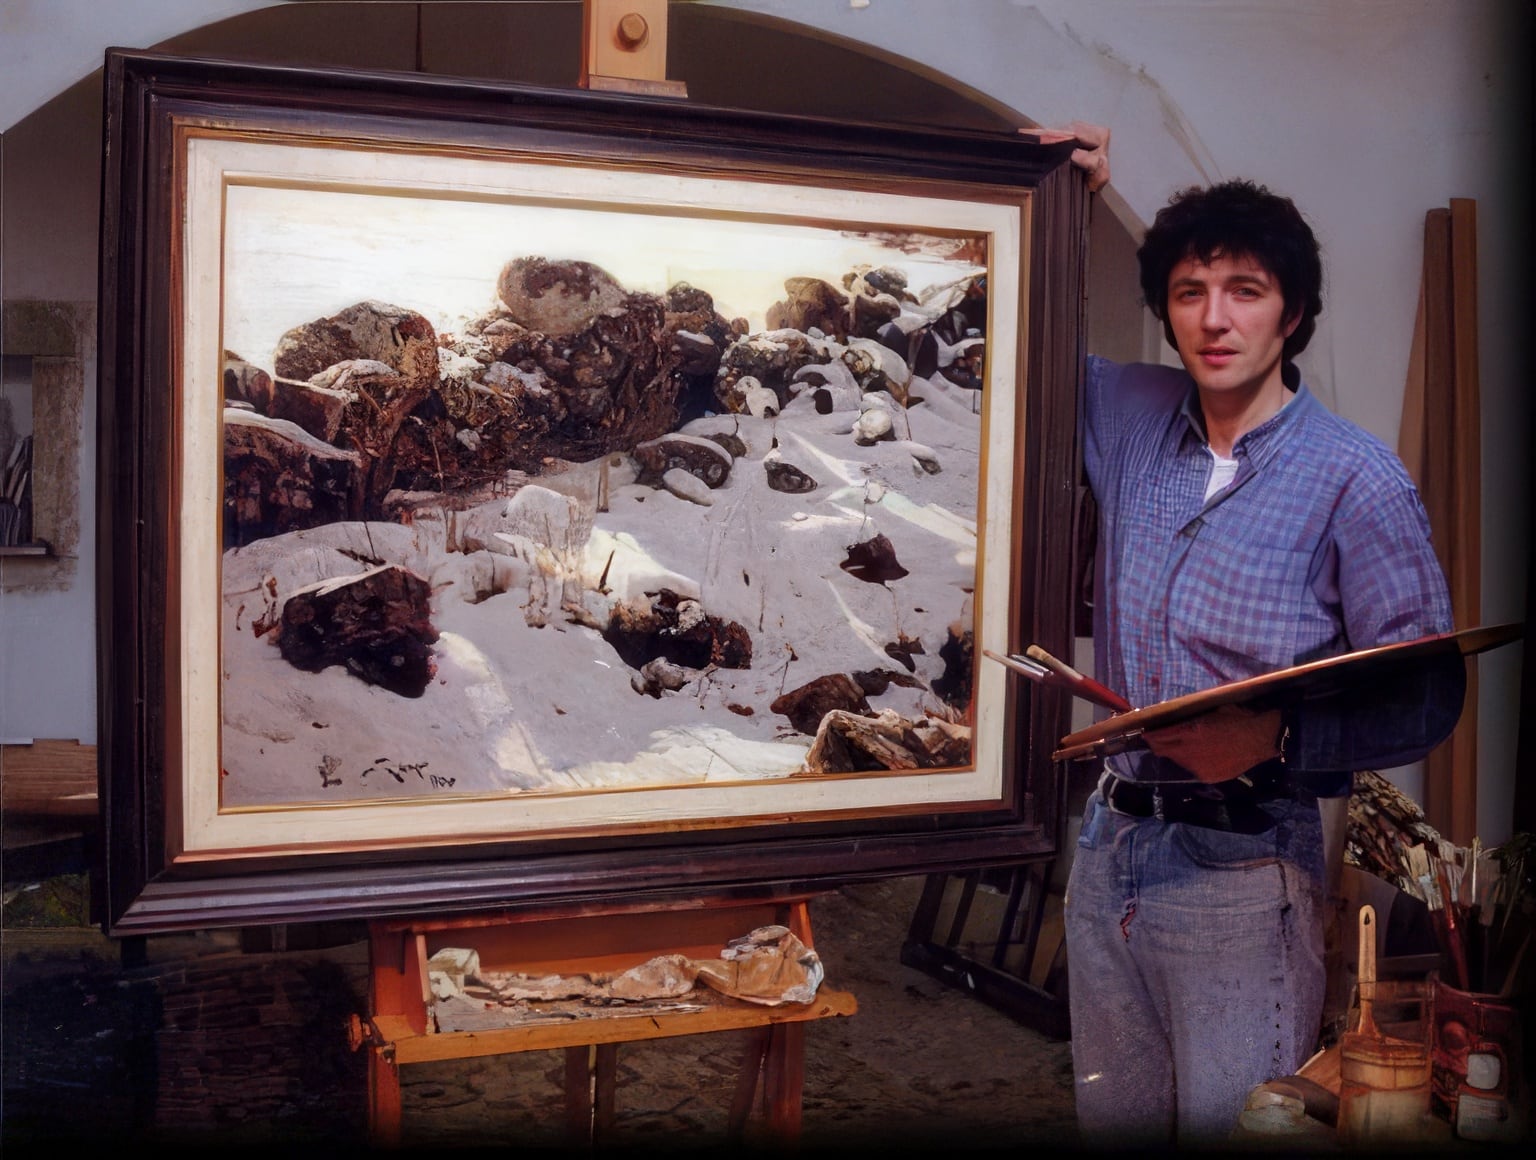 Manuel Sosa with the painting "Ermine and wall".